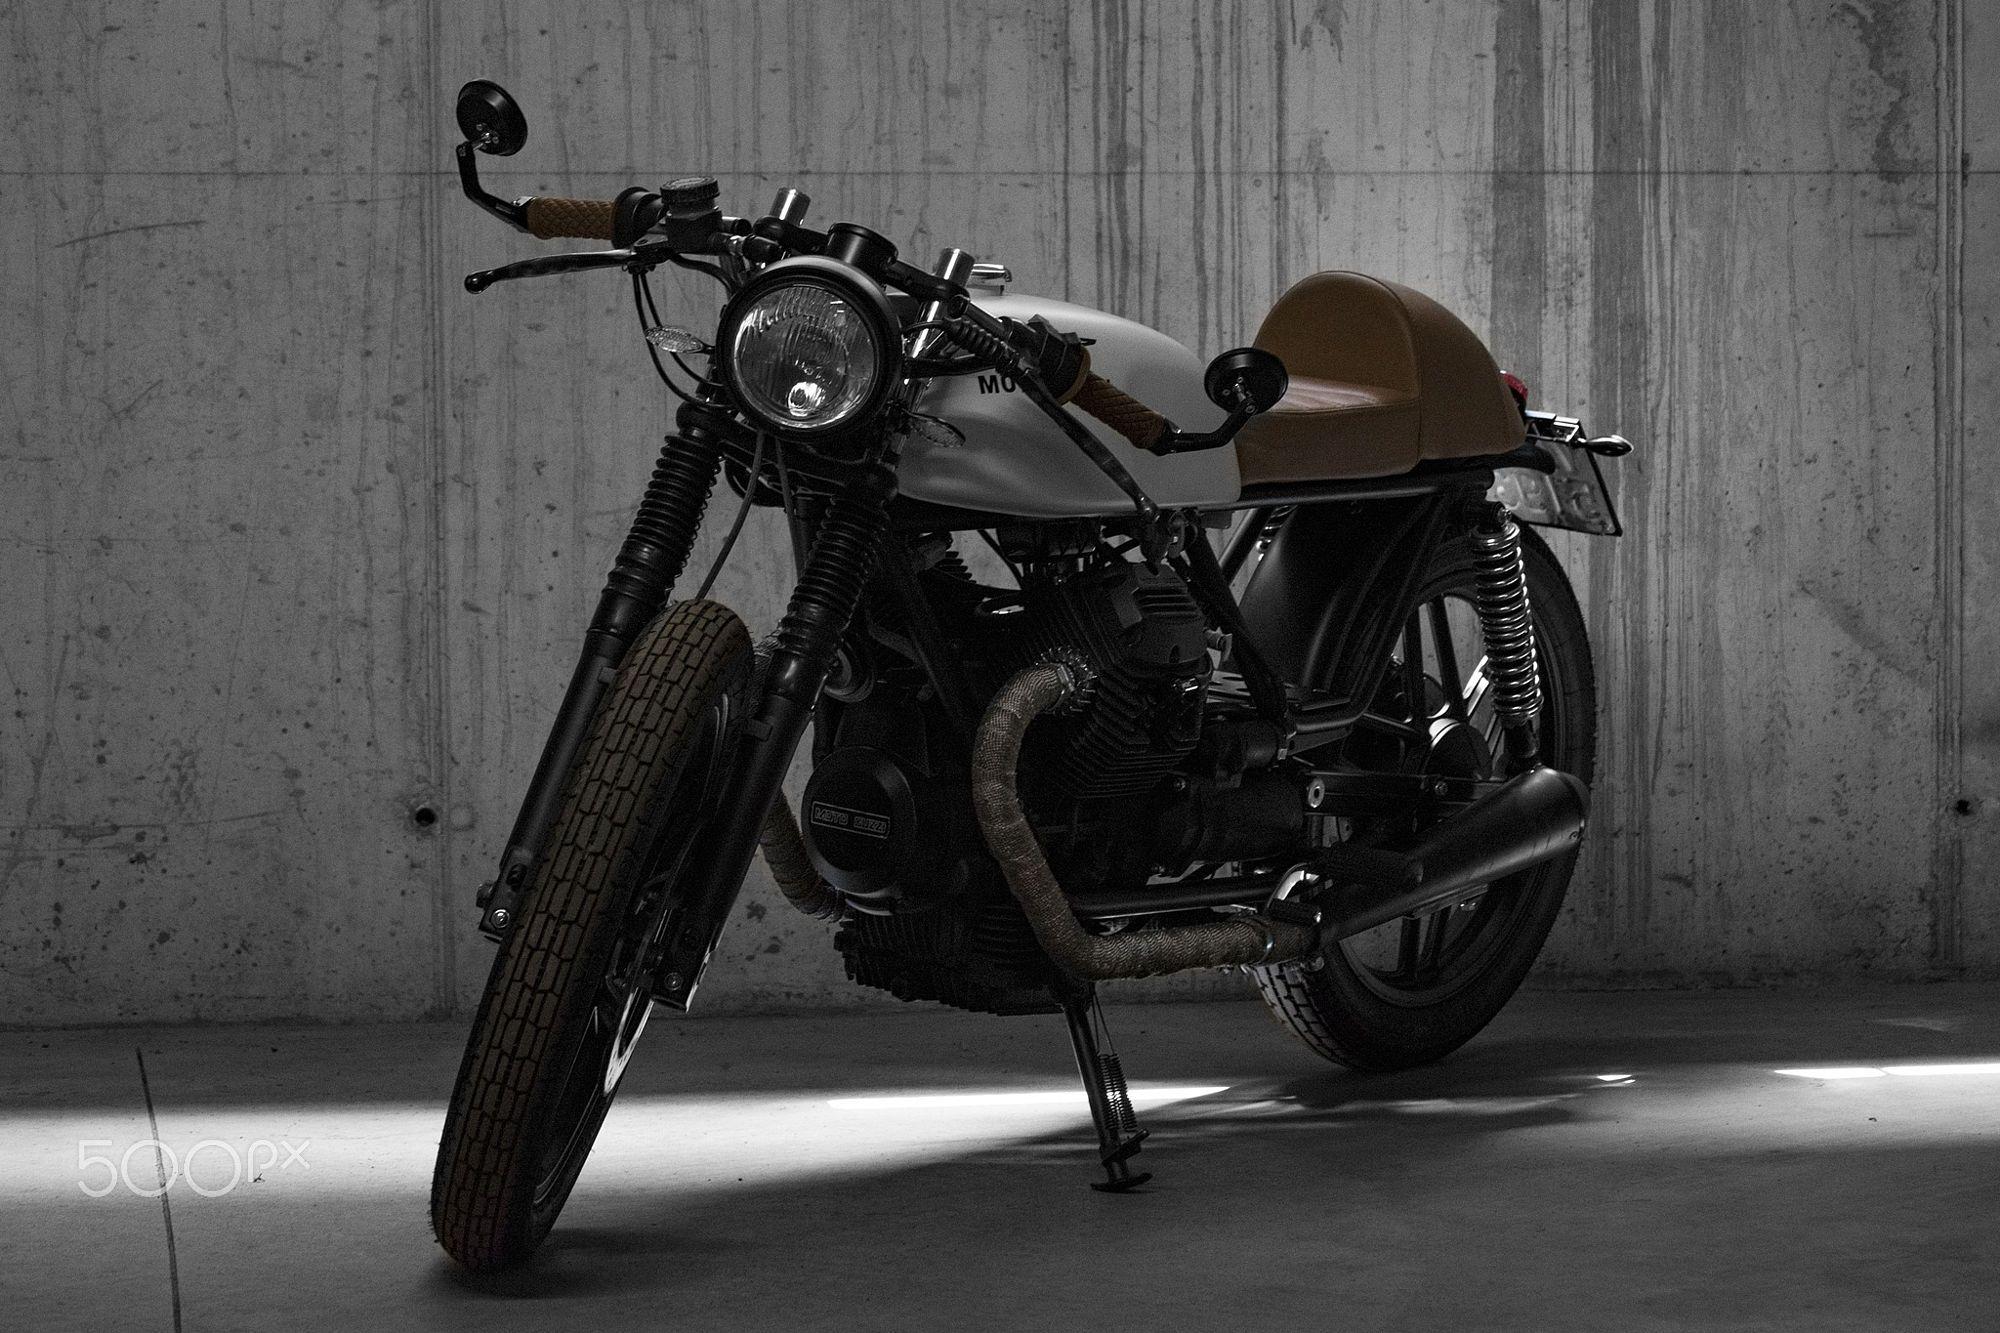 Moto Guzzi V35 converted in Cafe Racer HD Wallpaper From Gallsource